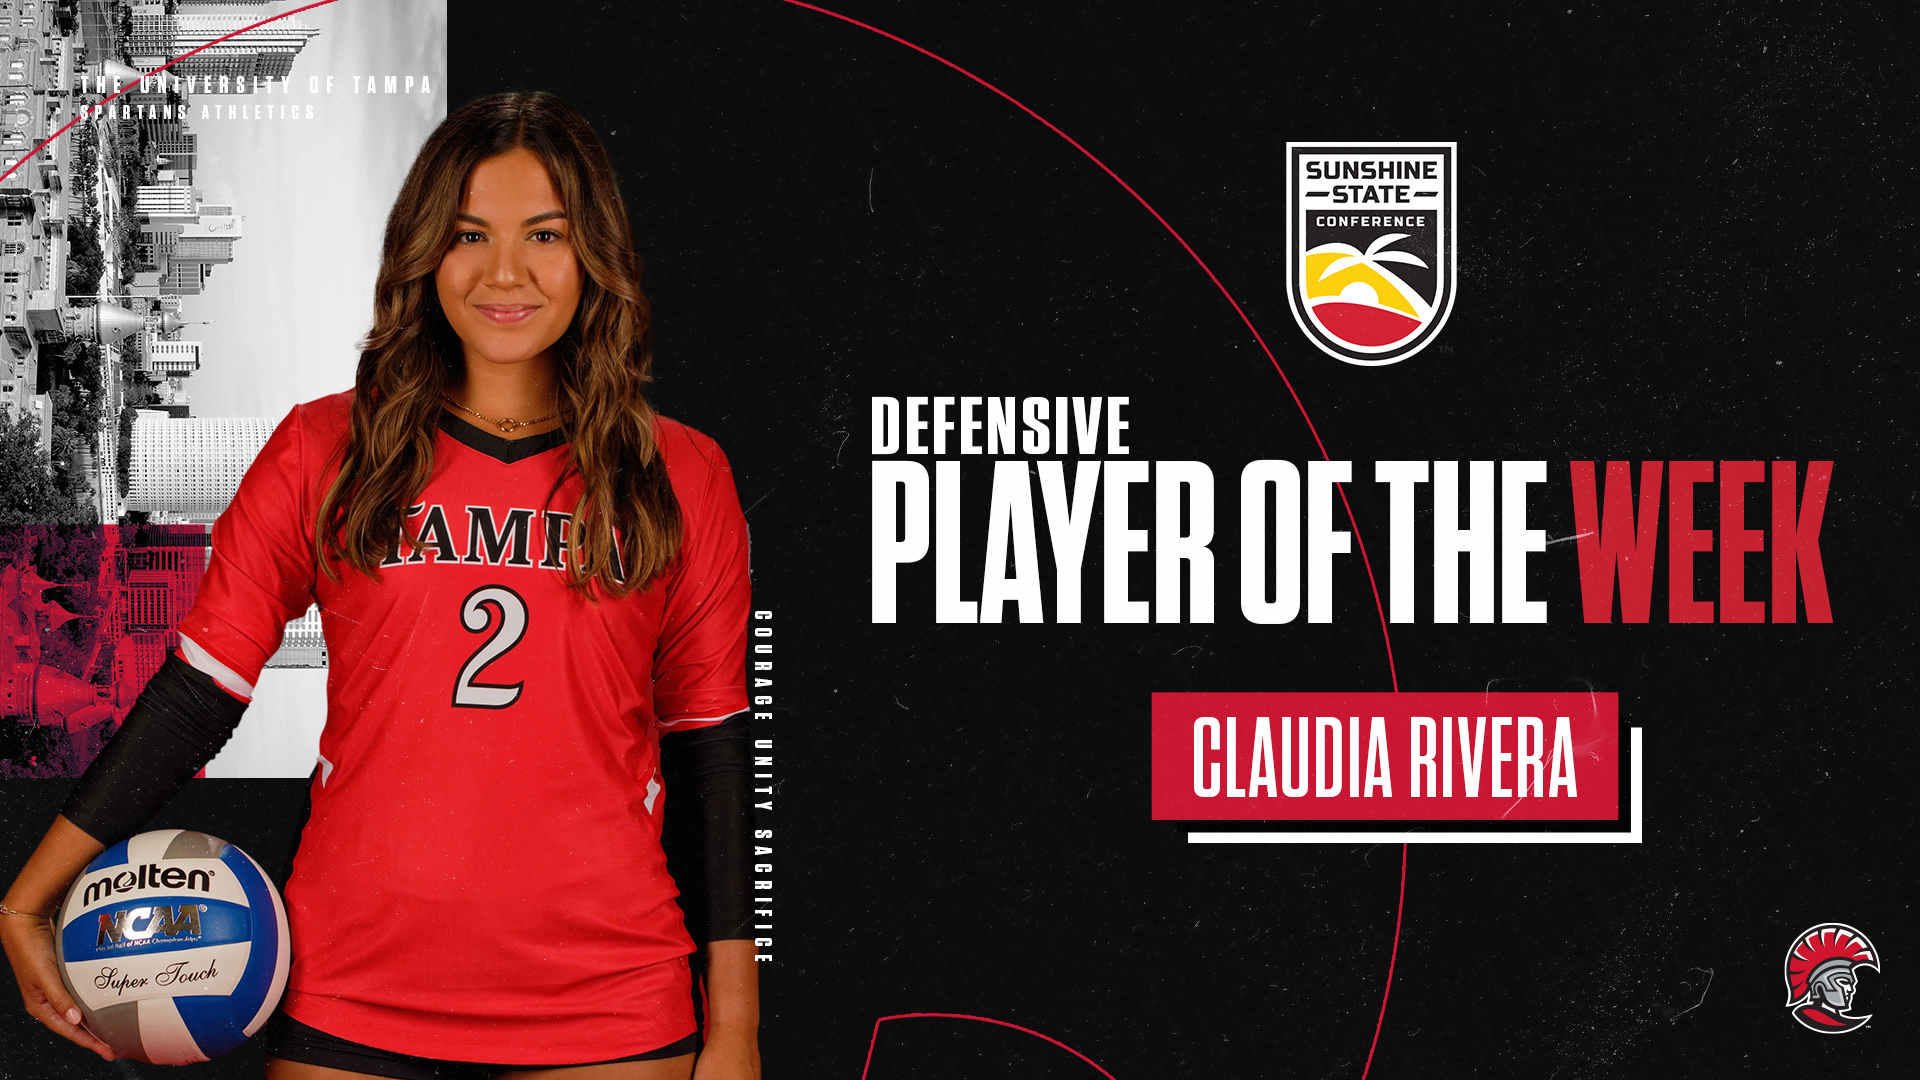 Rivera Wins SSC Defensive Player of the Week